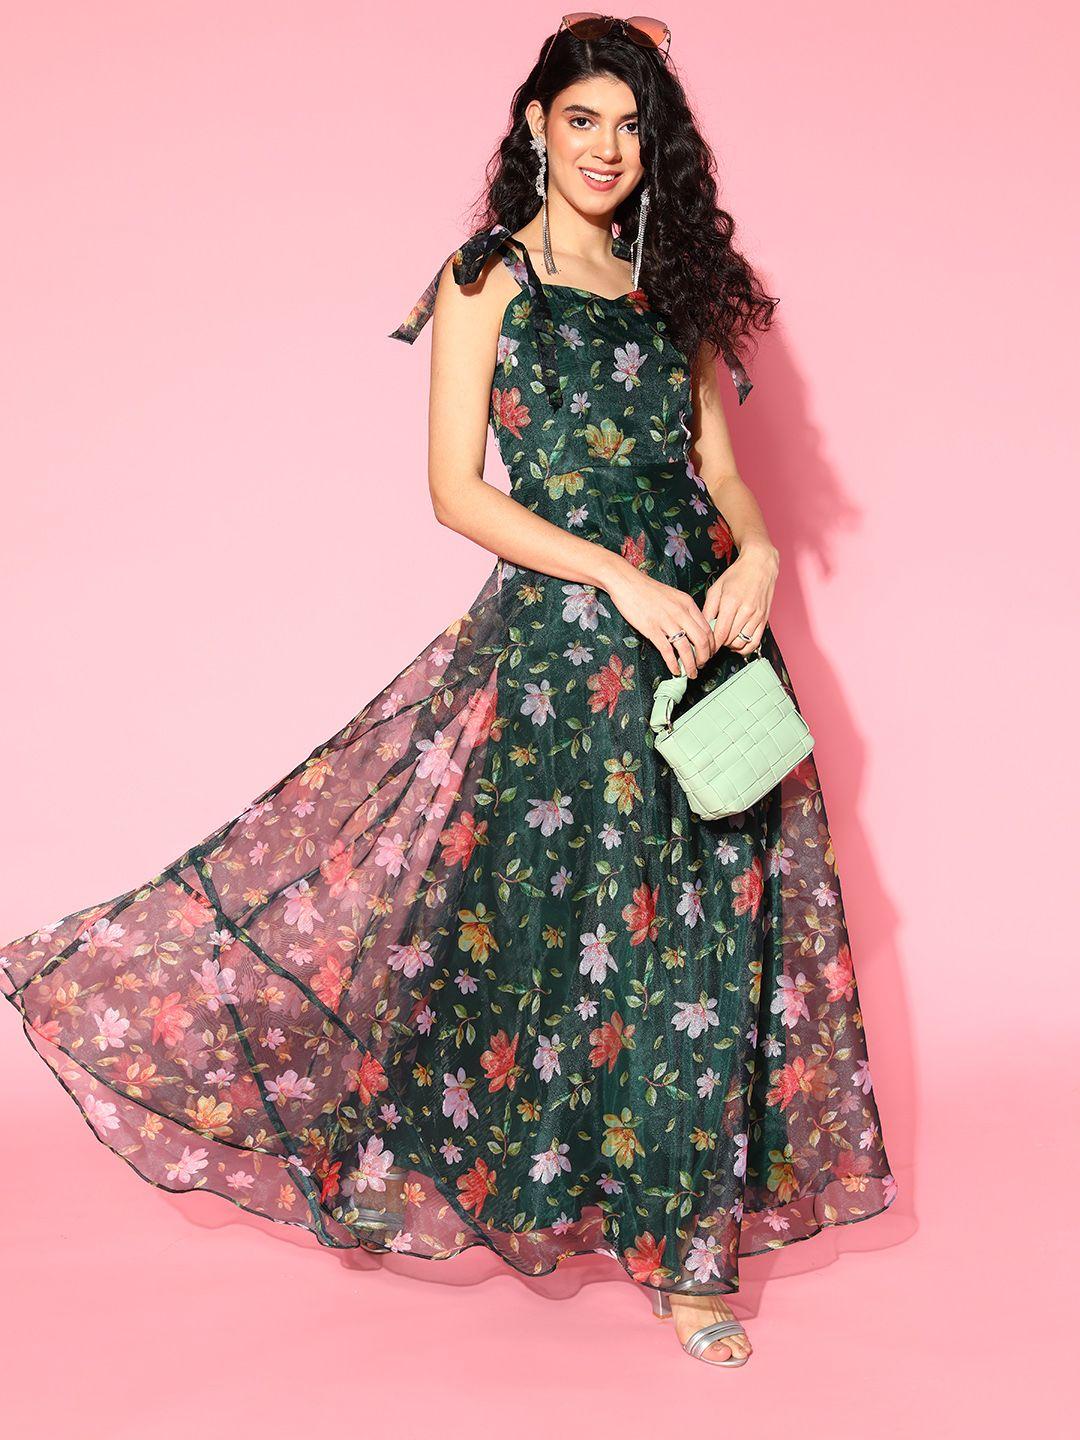 sangria gorgeous green floral gown for days